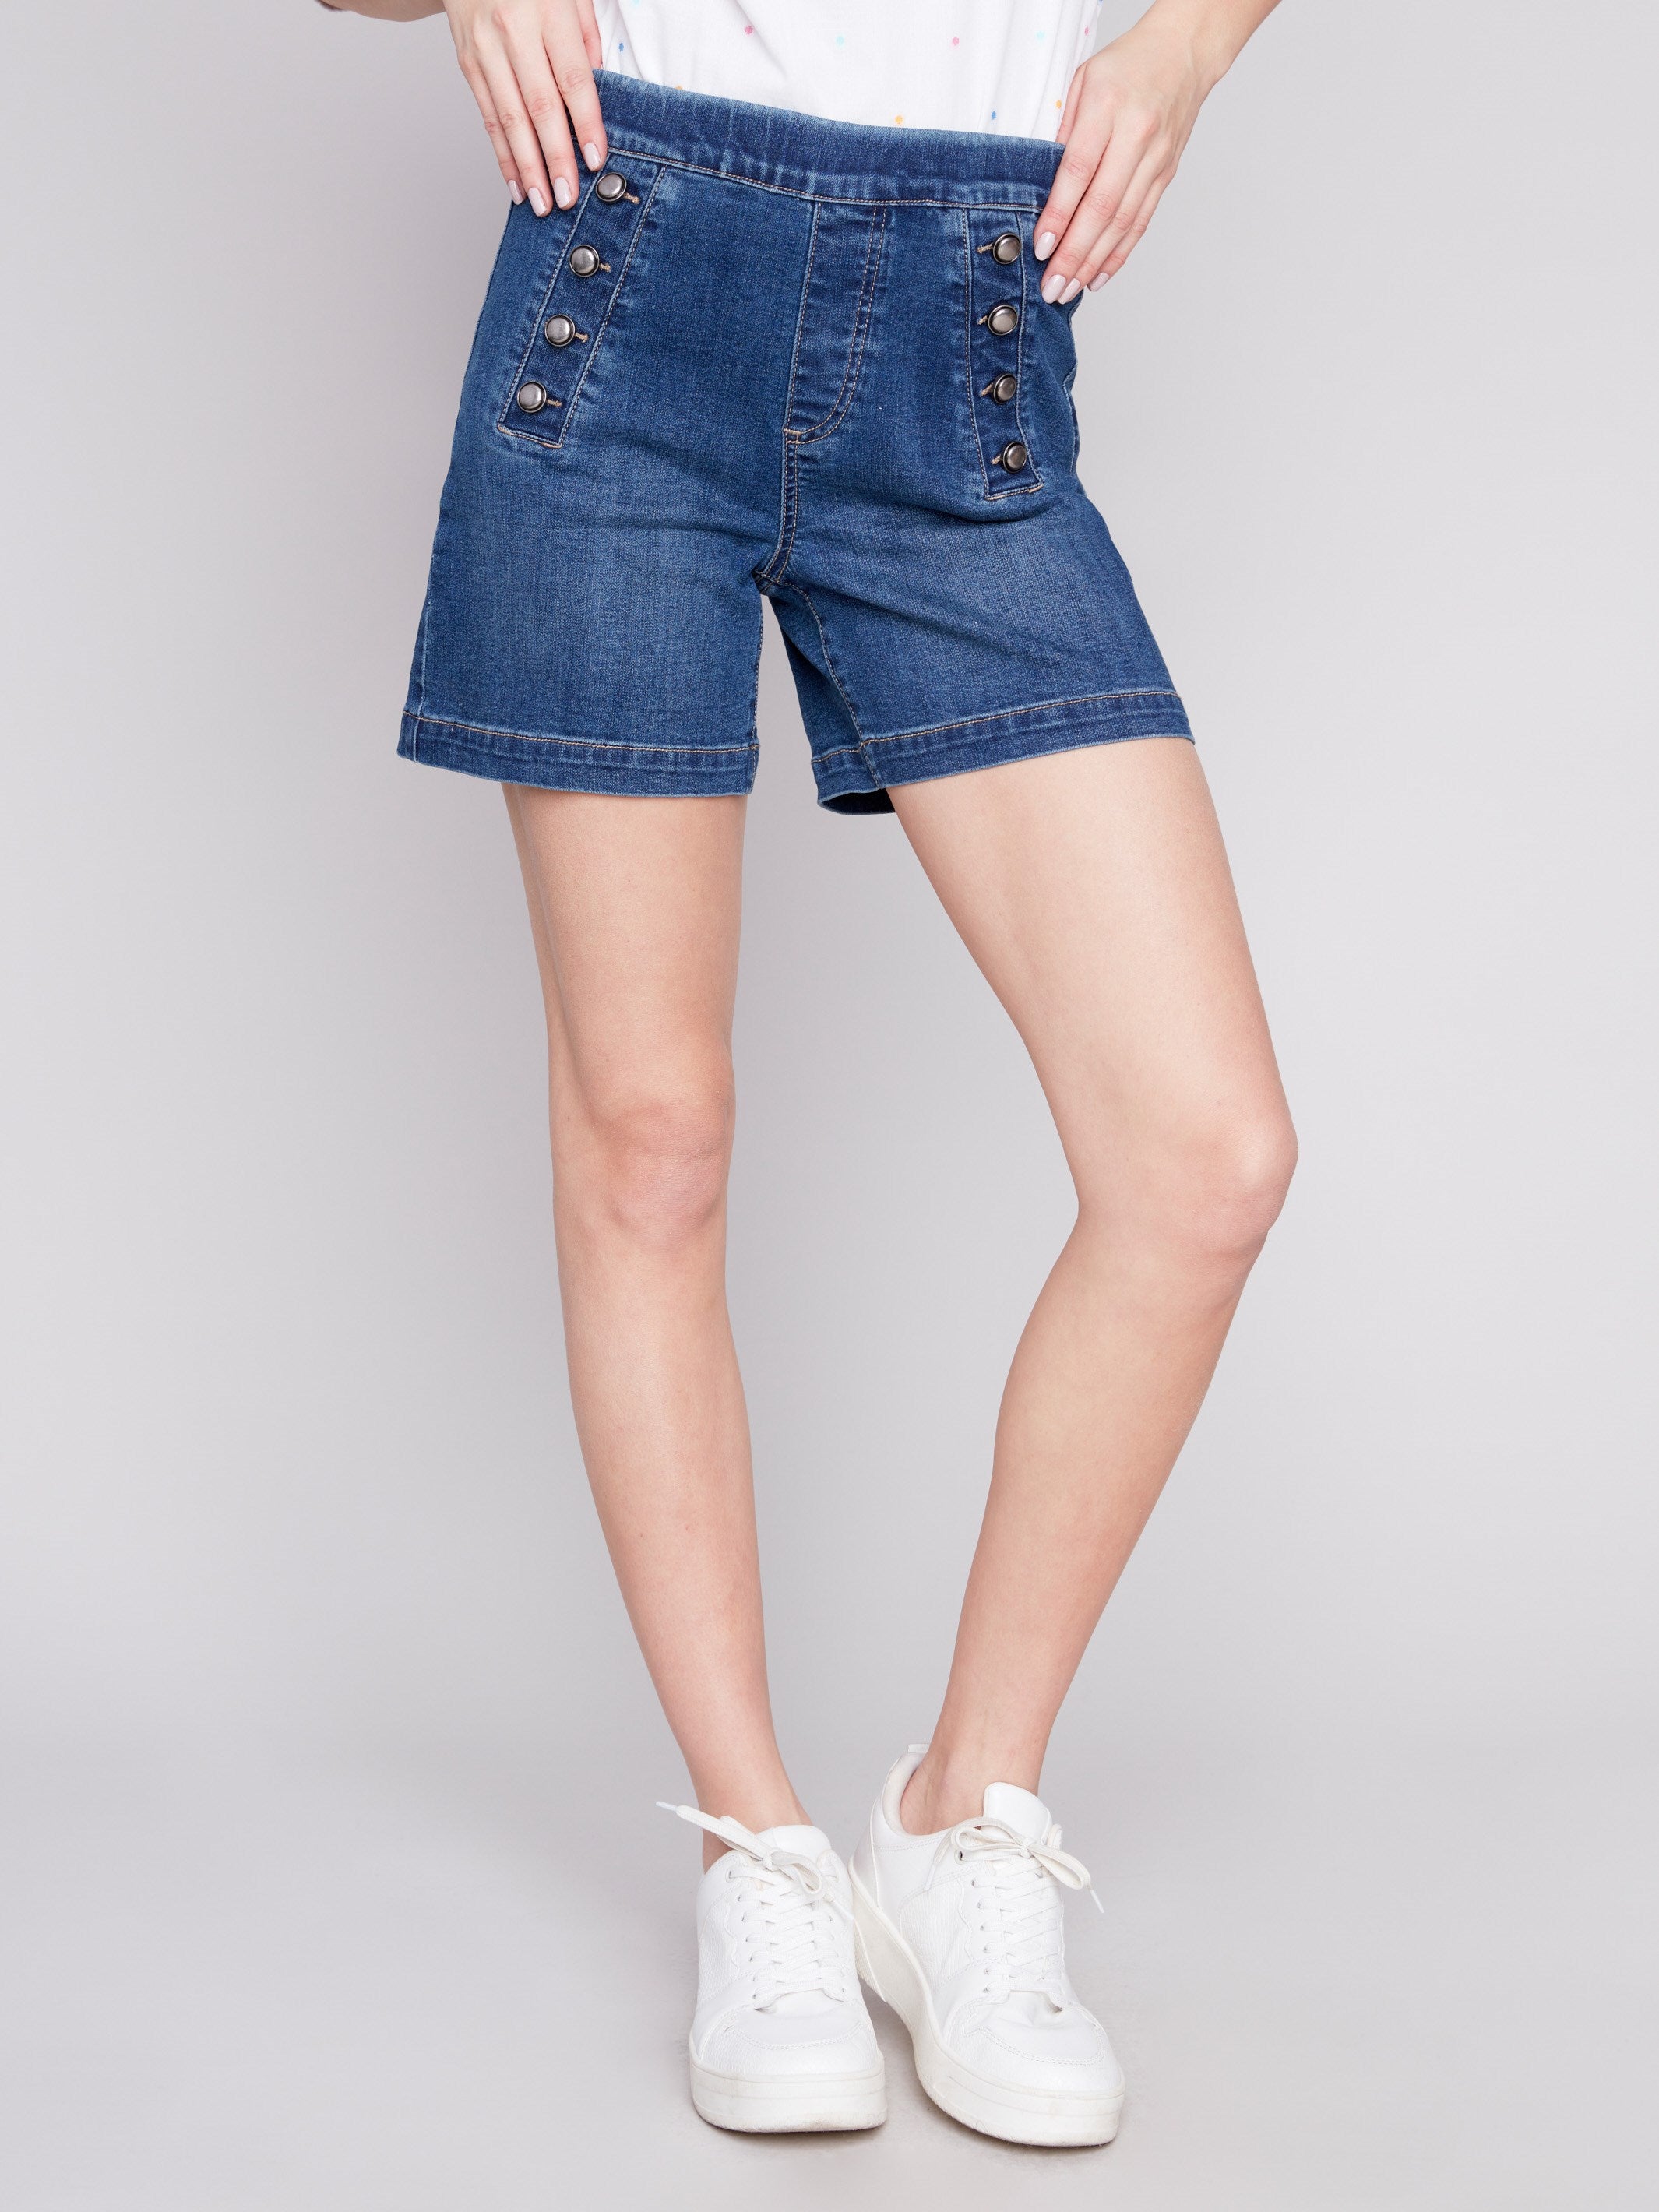 Denim Shorts with Decorative Buttons - Indigo - Charlie B Collection Canada - Image 3